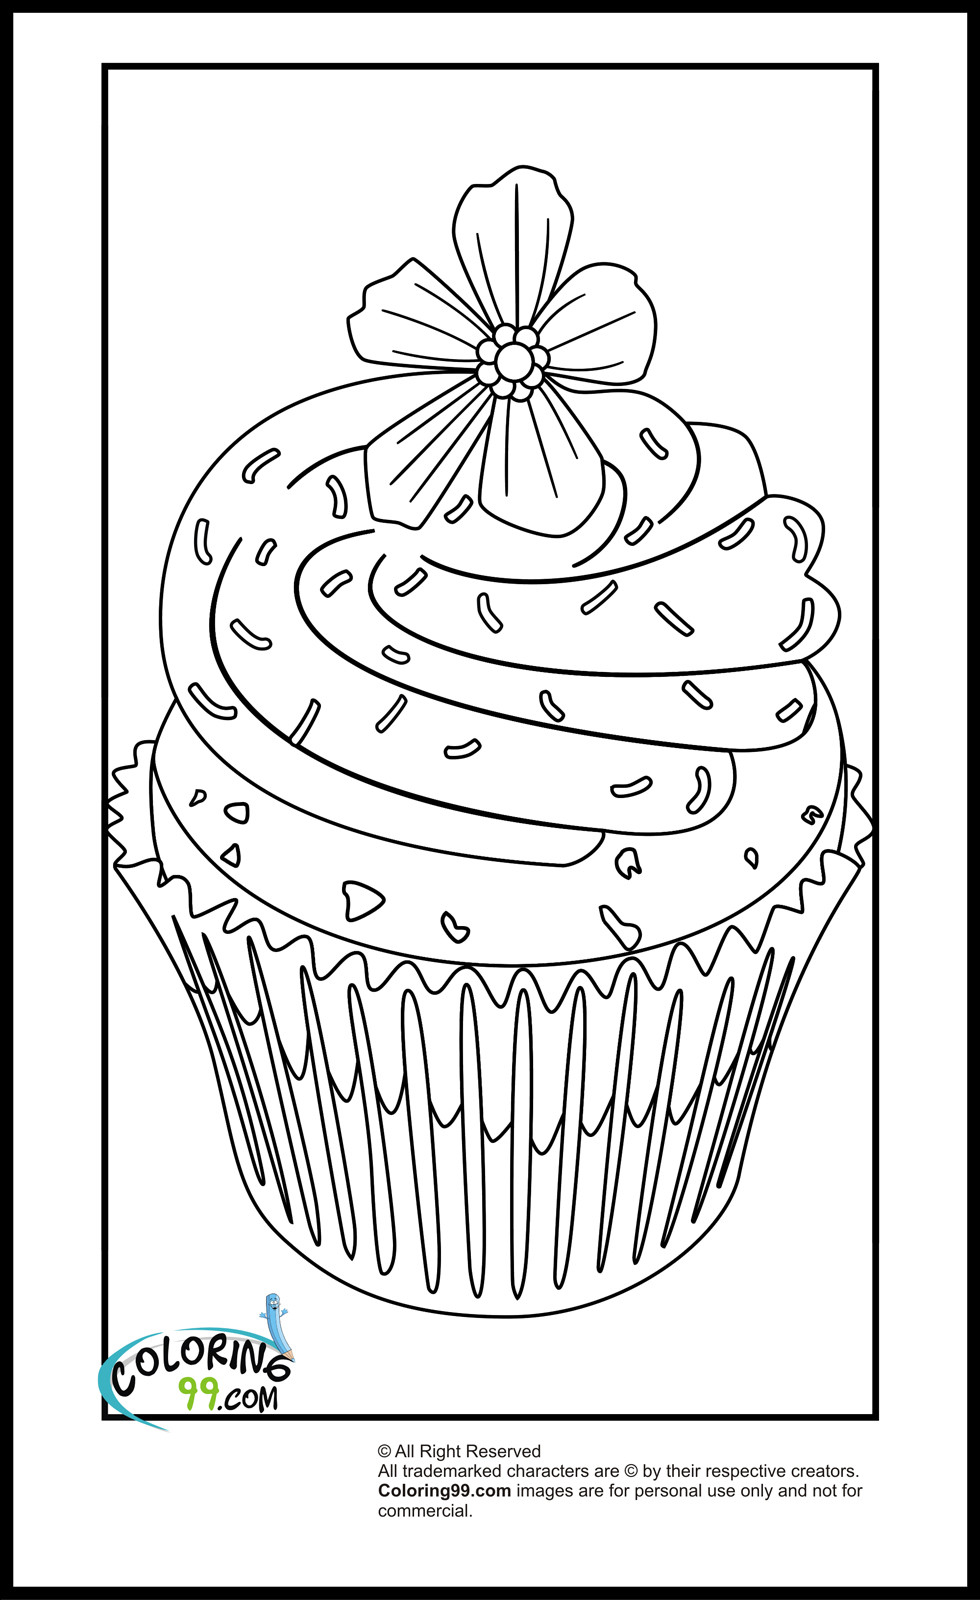 Cupcake Printable Coloring Pages
 Cupcake Coloring Pages